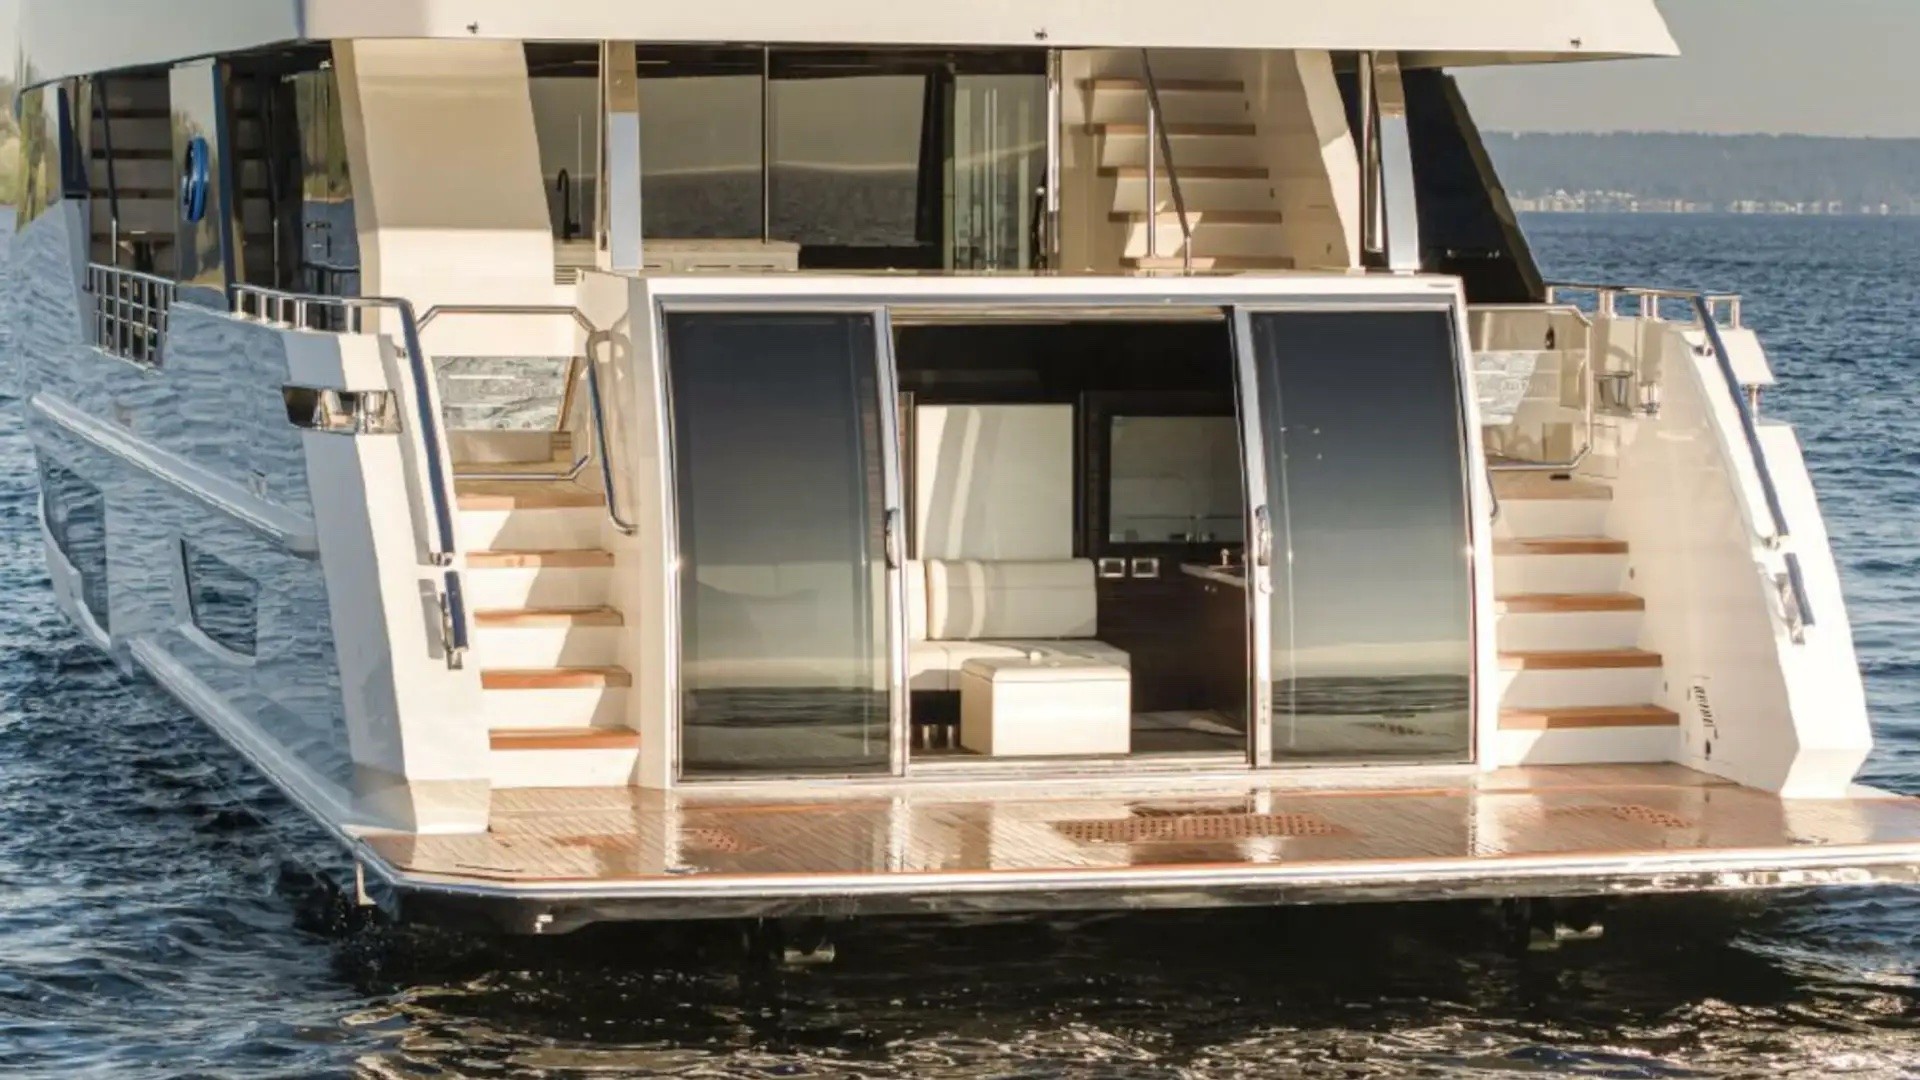 the golden standard for comfort and peace can be found in the 8 million tlc yacht 14